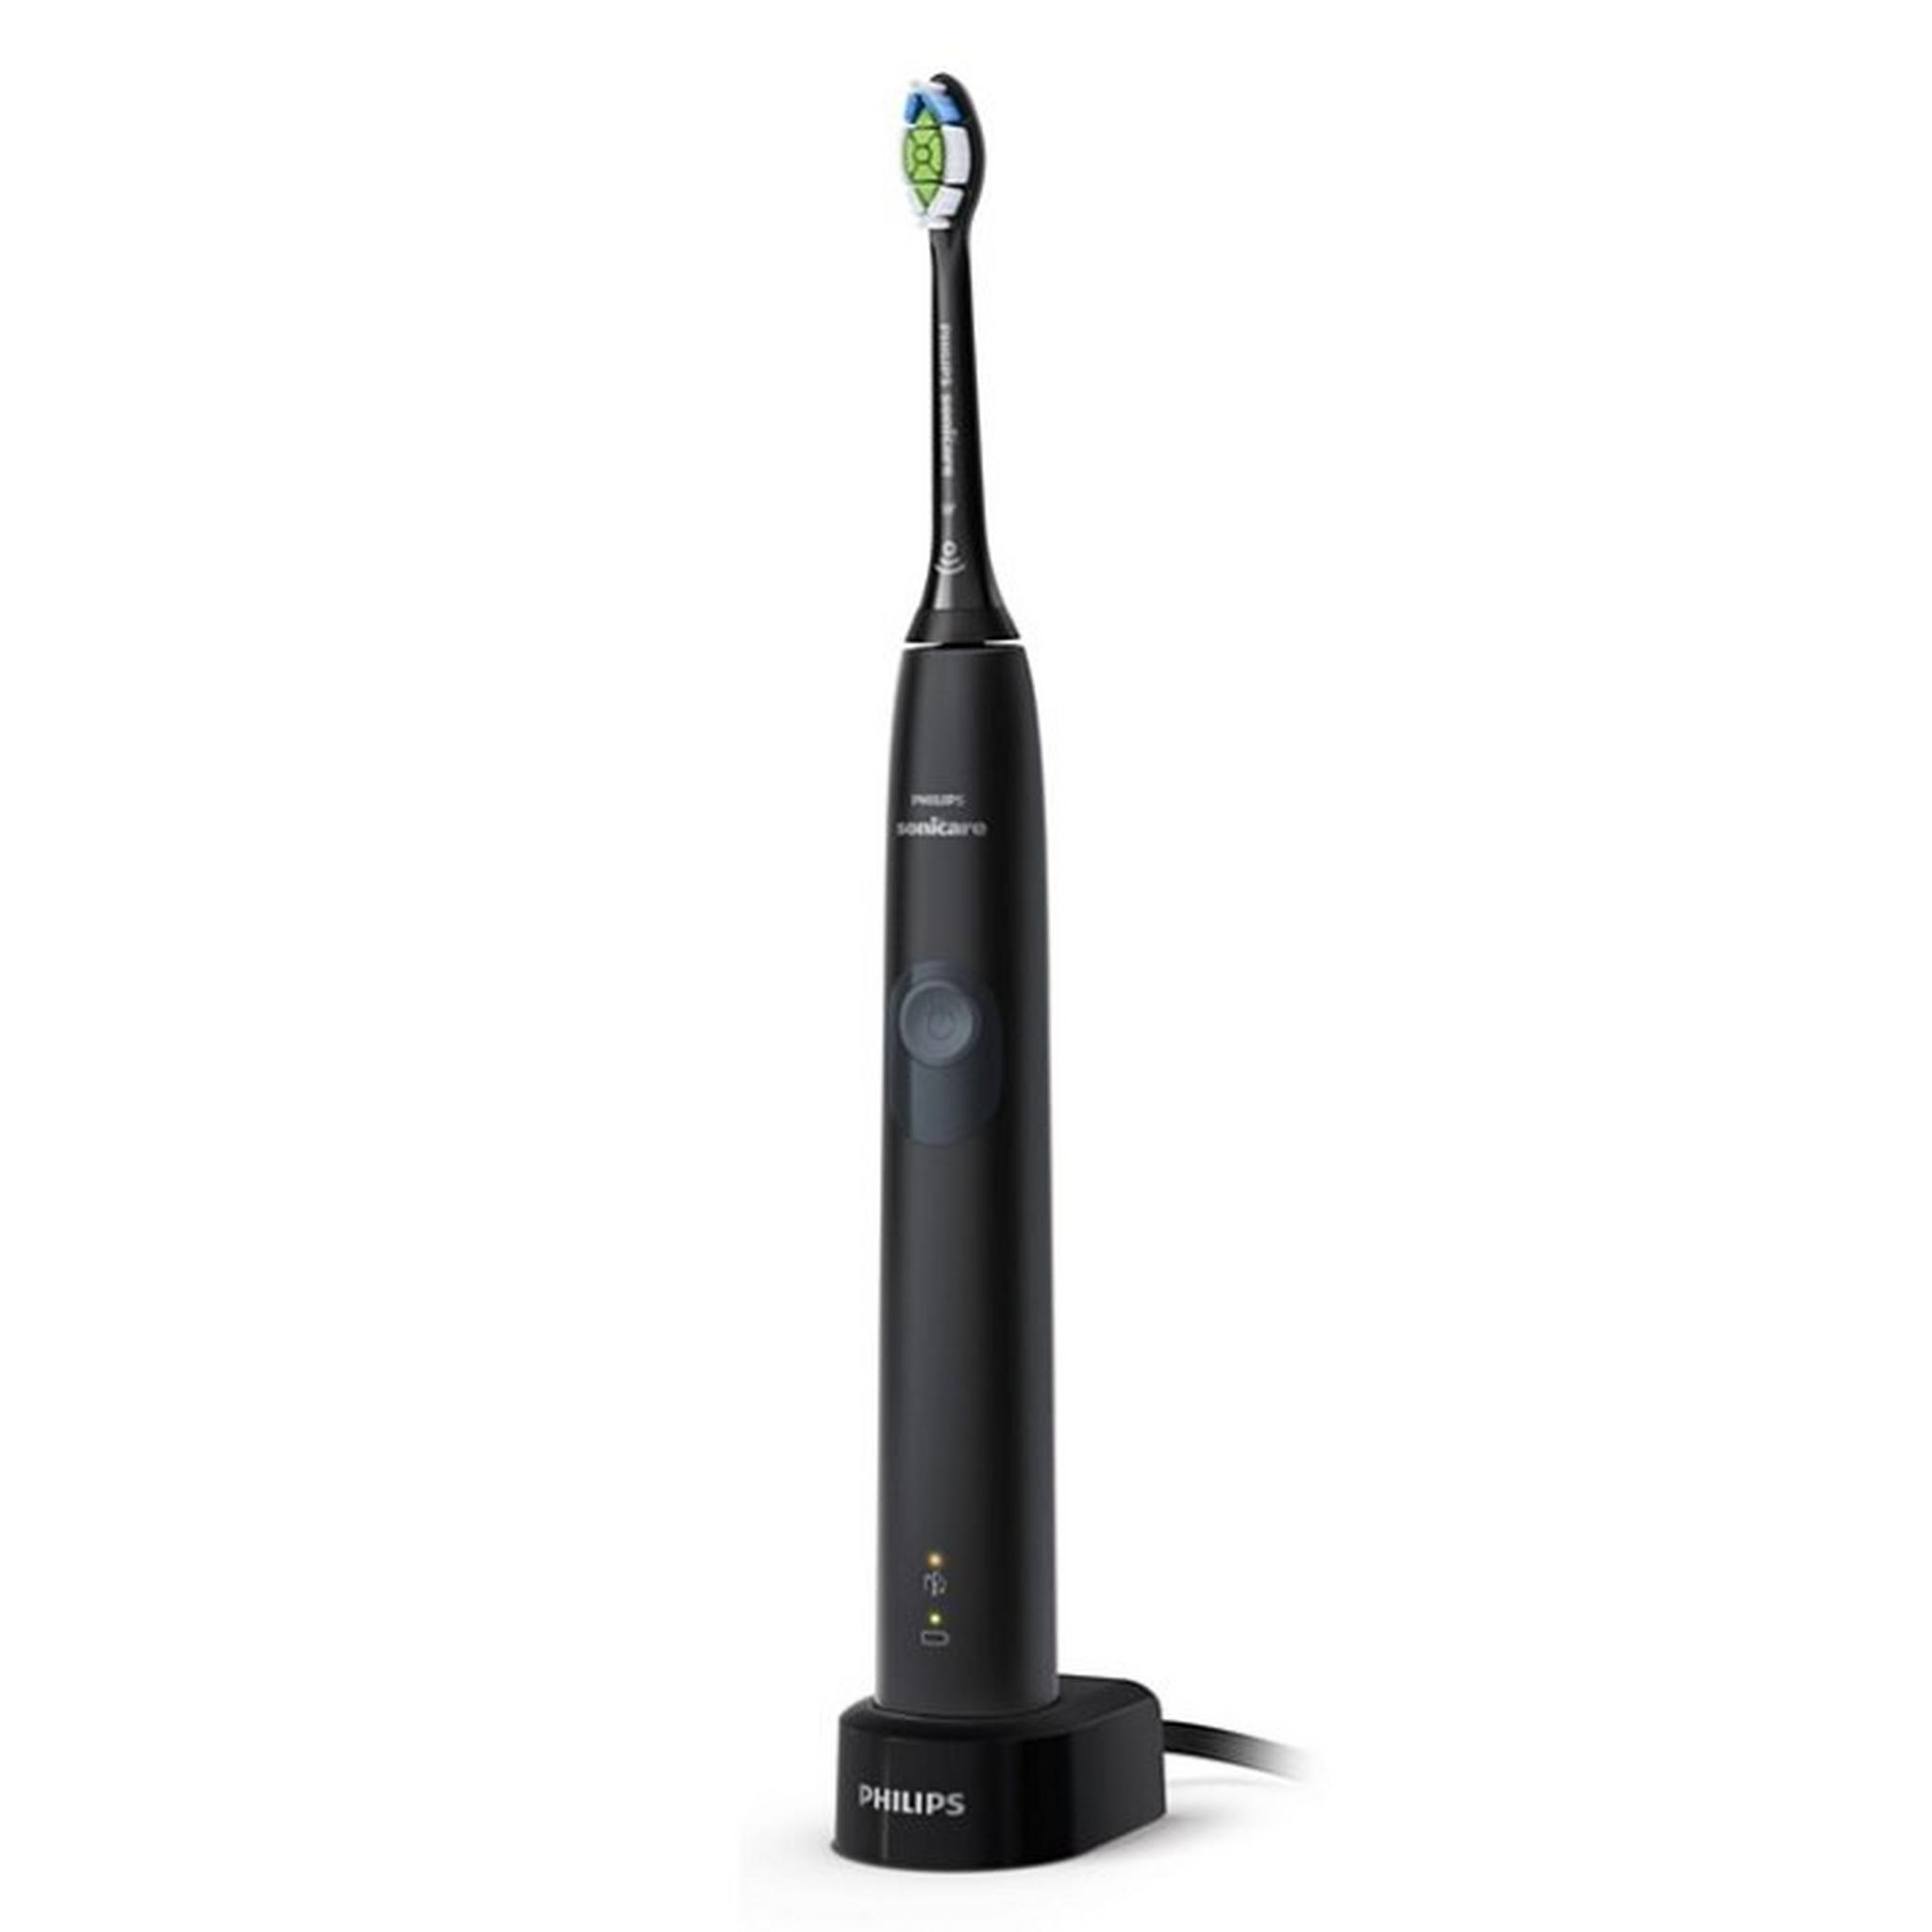 Philips Sonicare ProtectiveClean 4300 Sonic Electric Toothbrush (HX6800/44)